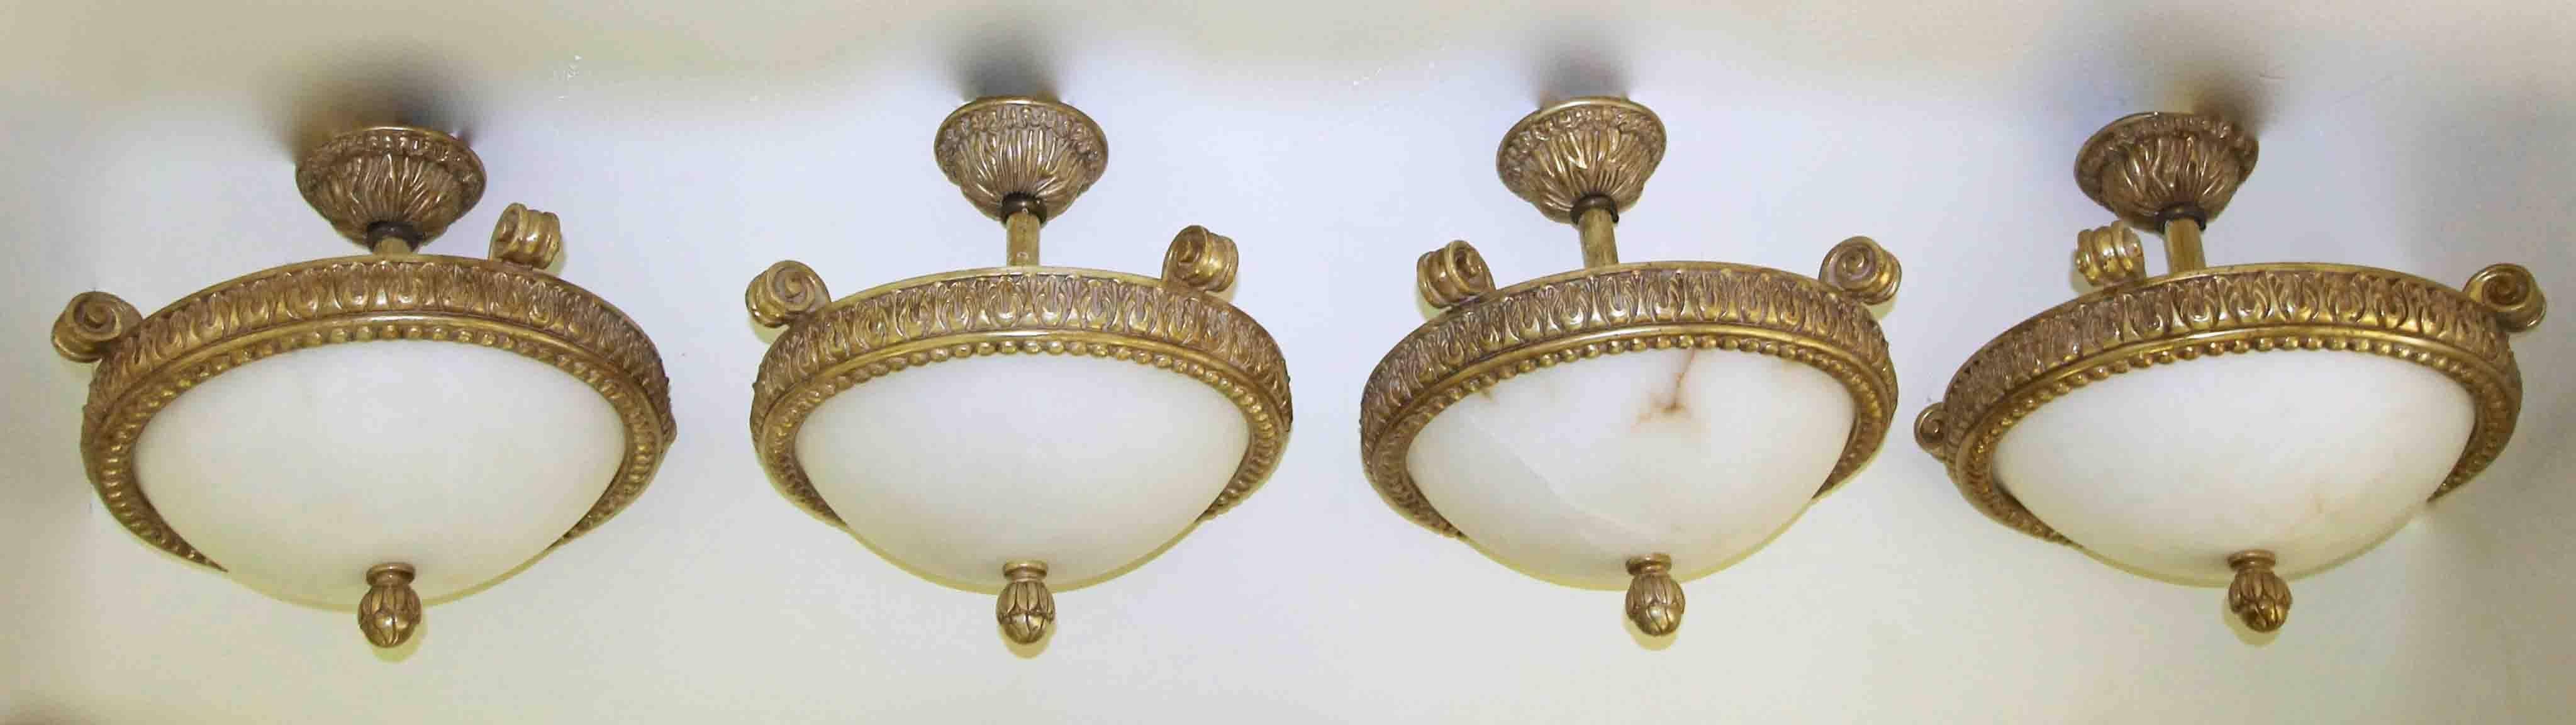 Neoclassical Set of Four Giltwood Alabaster Pendant Ceiling Lights